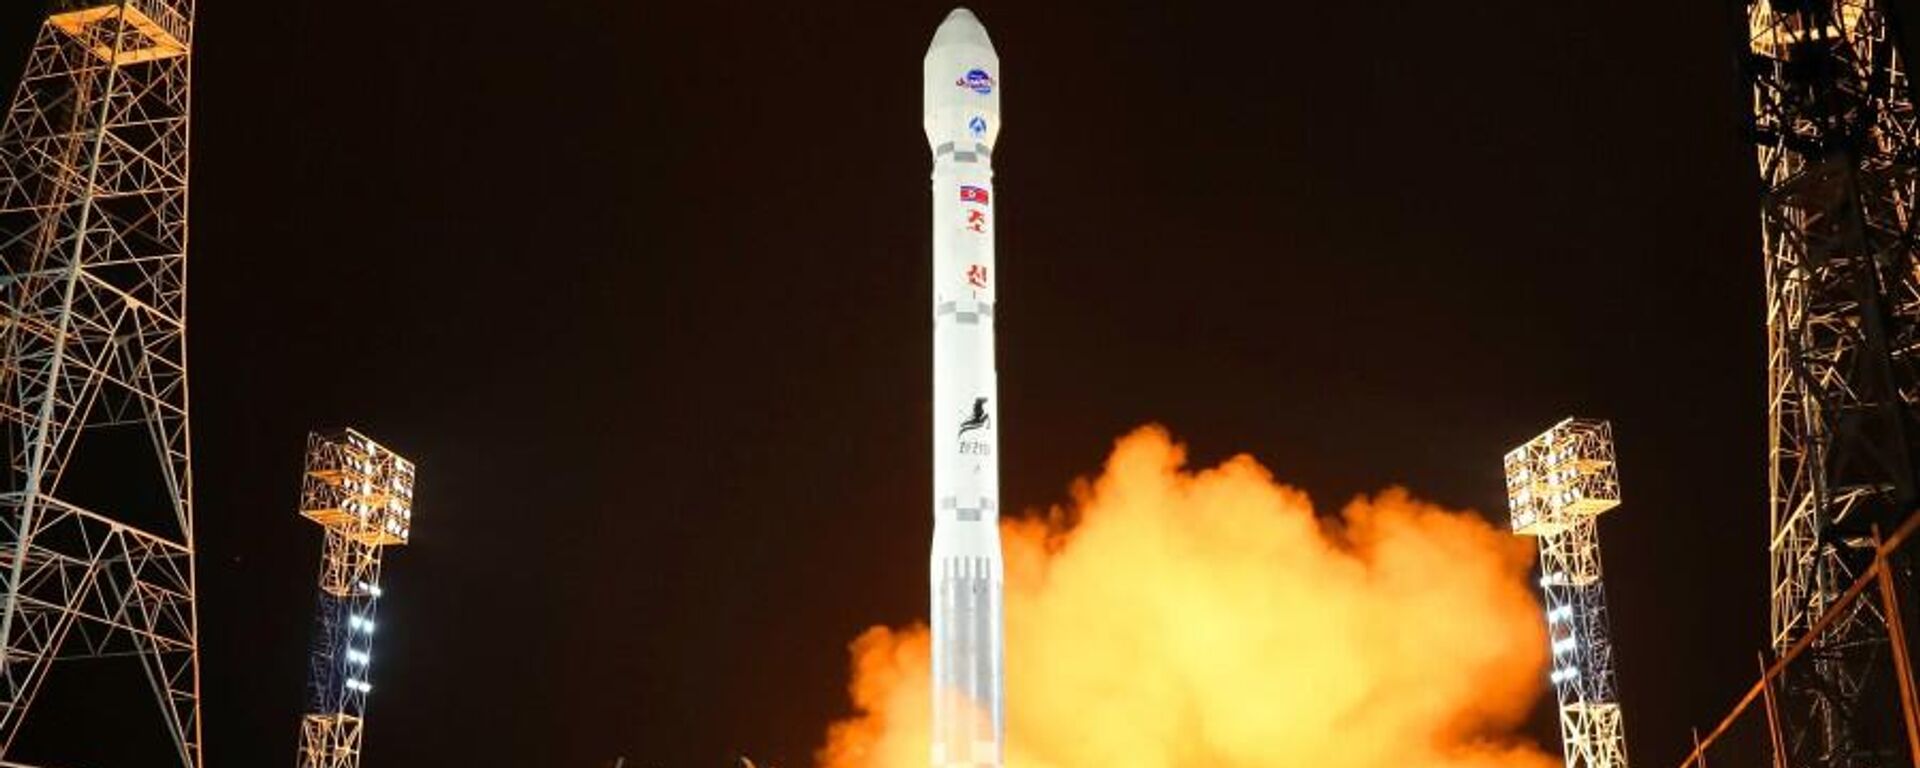 The General Bureau of Aerospace Engineering of the DPRK successfully launched the Manrigyong-1 reconnaissance satellite at 22 hours, 42 minutes and 28 seconds on November 21, 112 Juche (2023) using a new type of Chollima-1 carrier rocket from Sohae Space Center in Cholsan County, North Pyongan Province. - Sputnik International, 1920, 23.11.2023